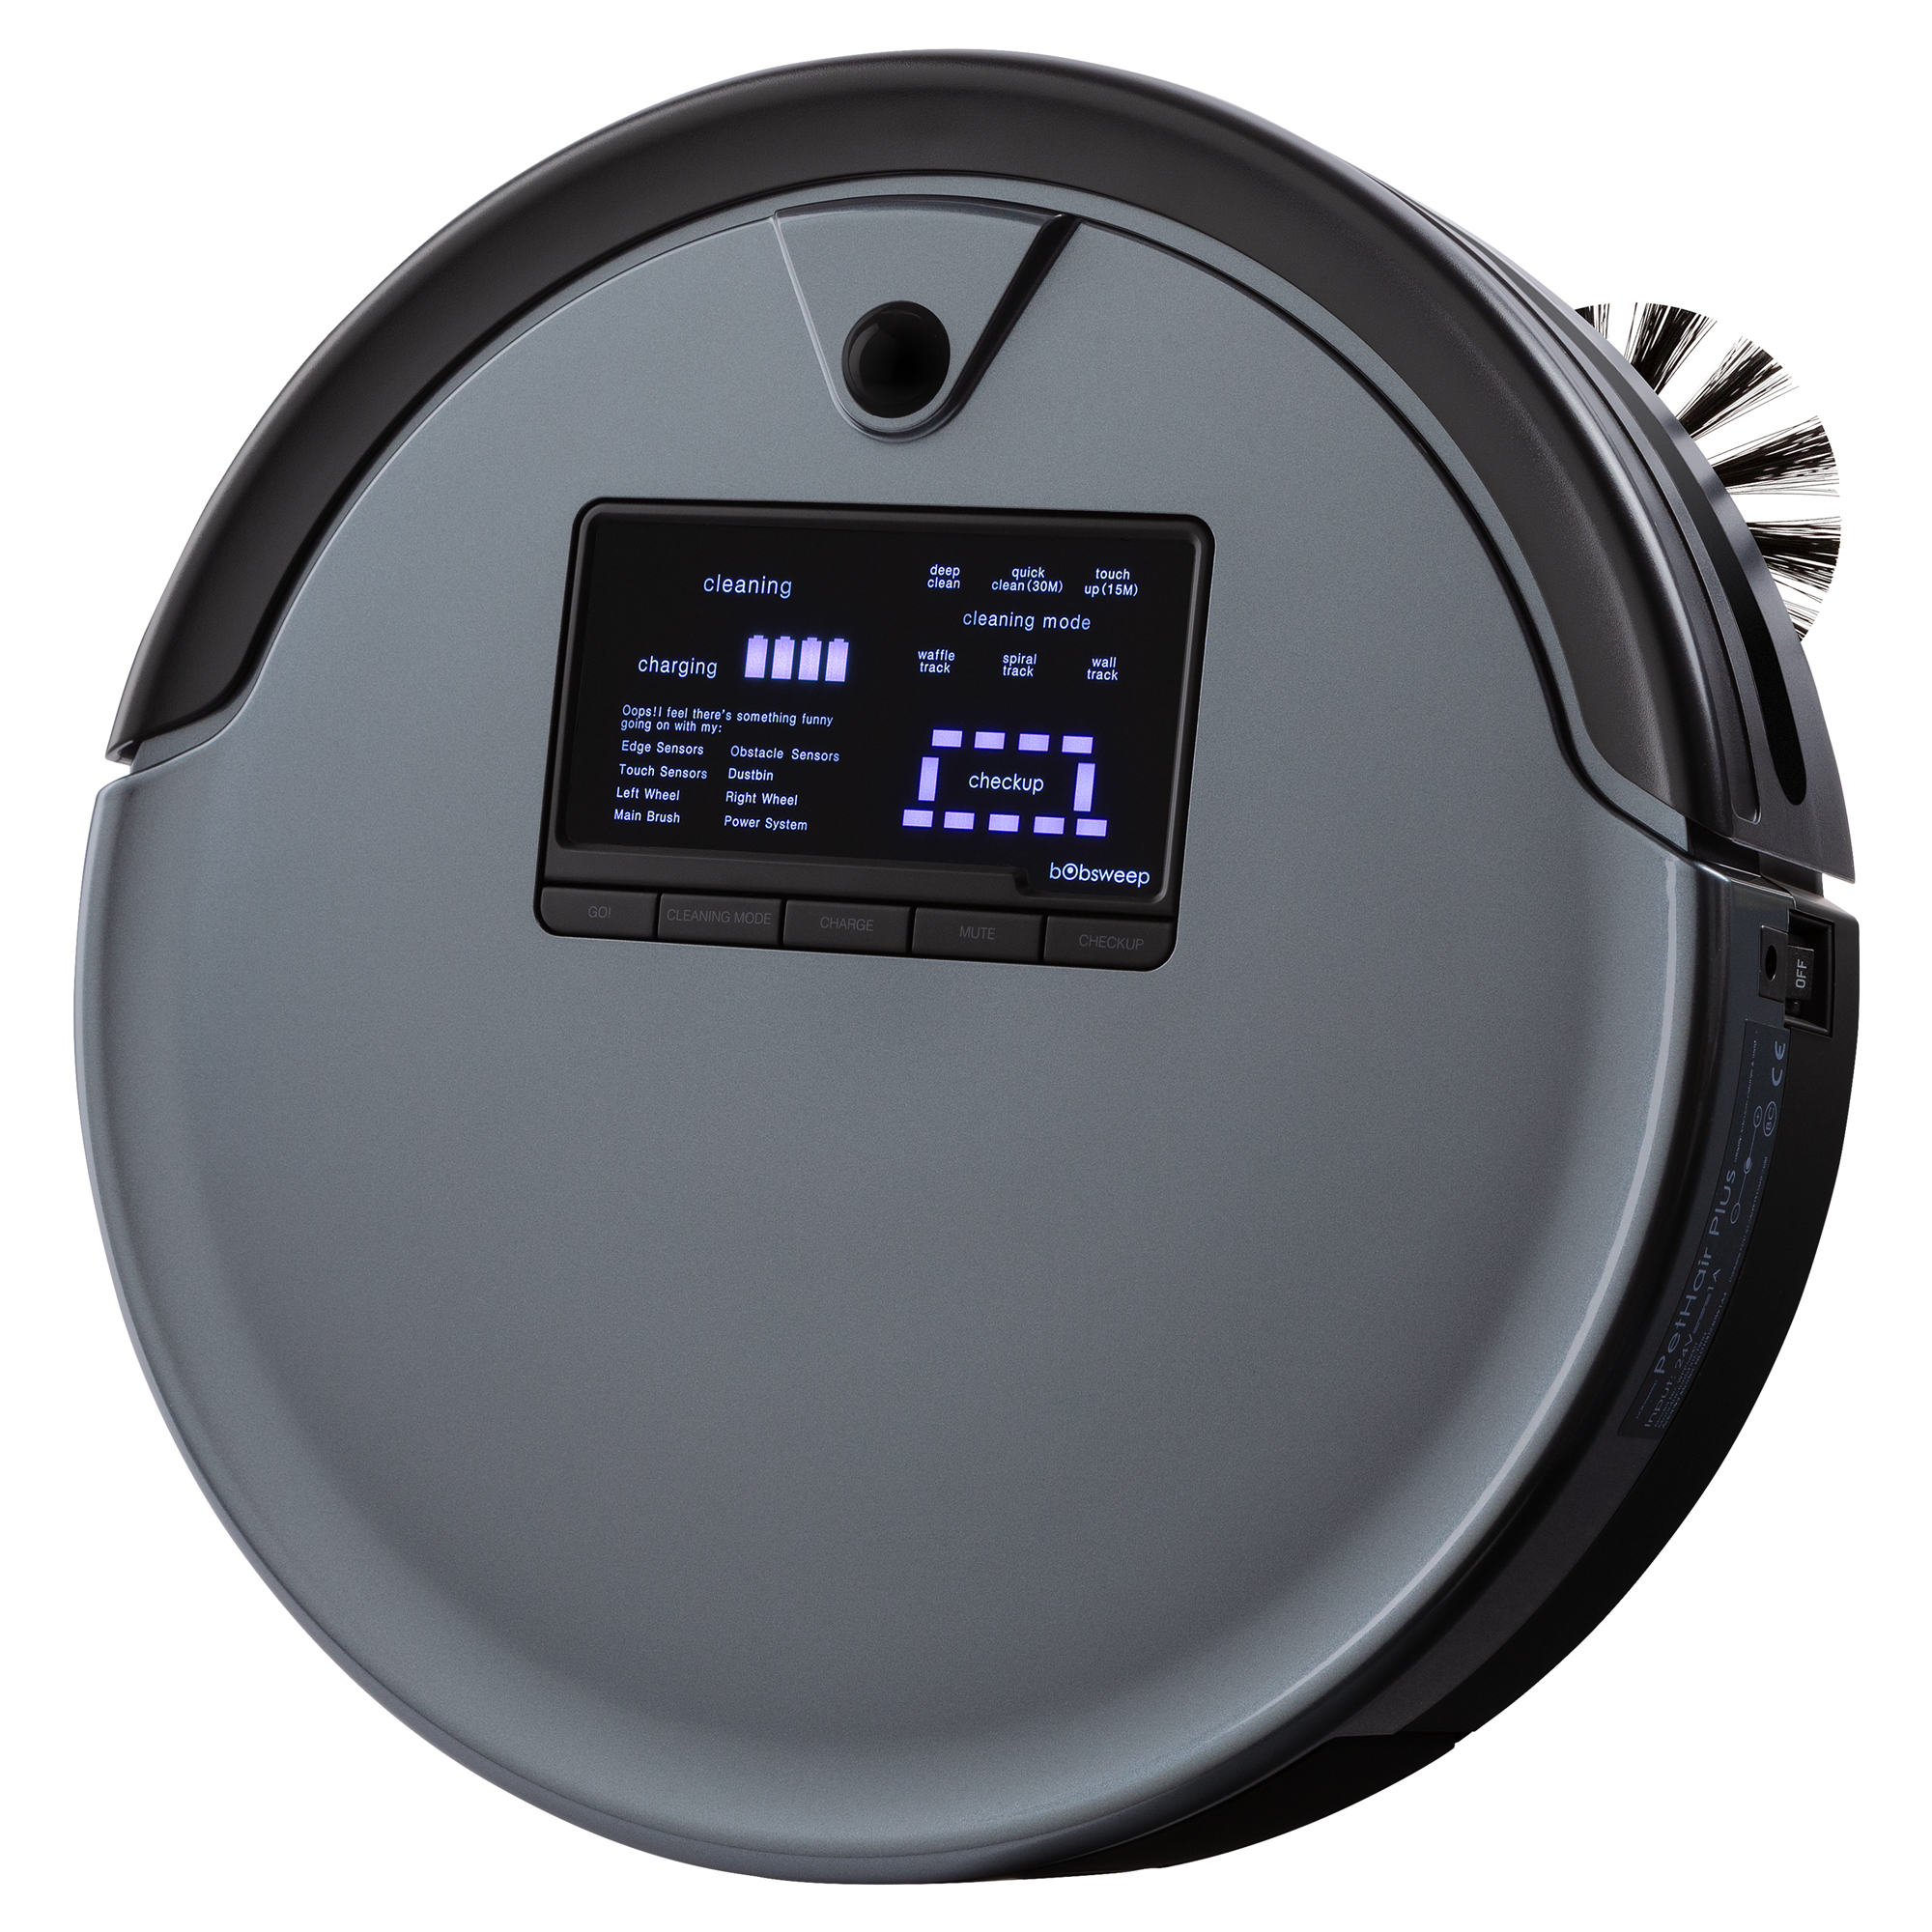 Bobsweep Pet Hair Plus Robotic Vacuum Cleaner and Mop, Charcoal - image 2 of 8